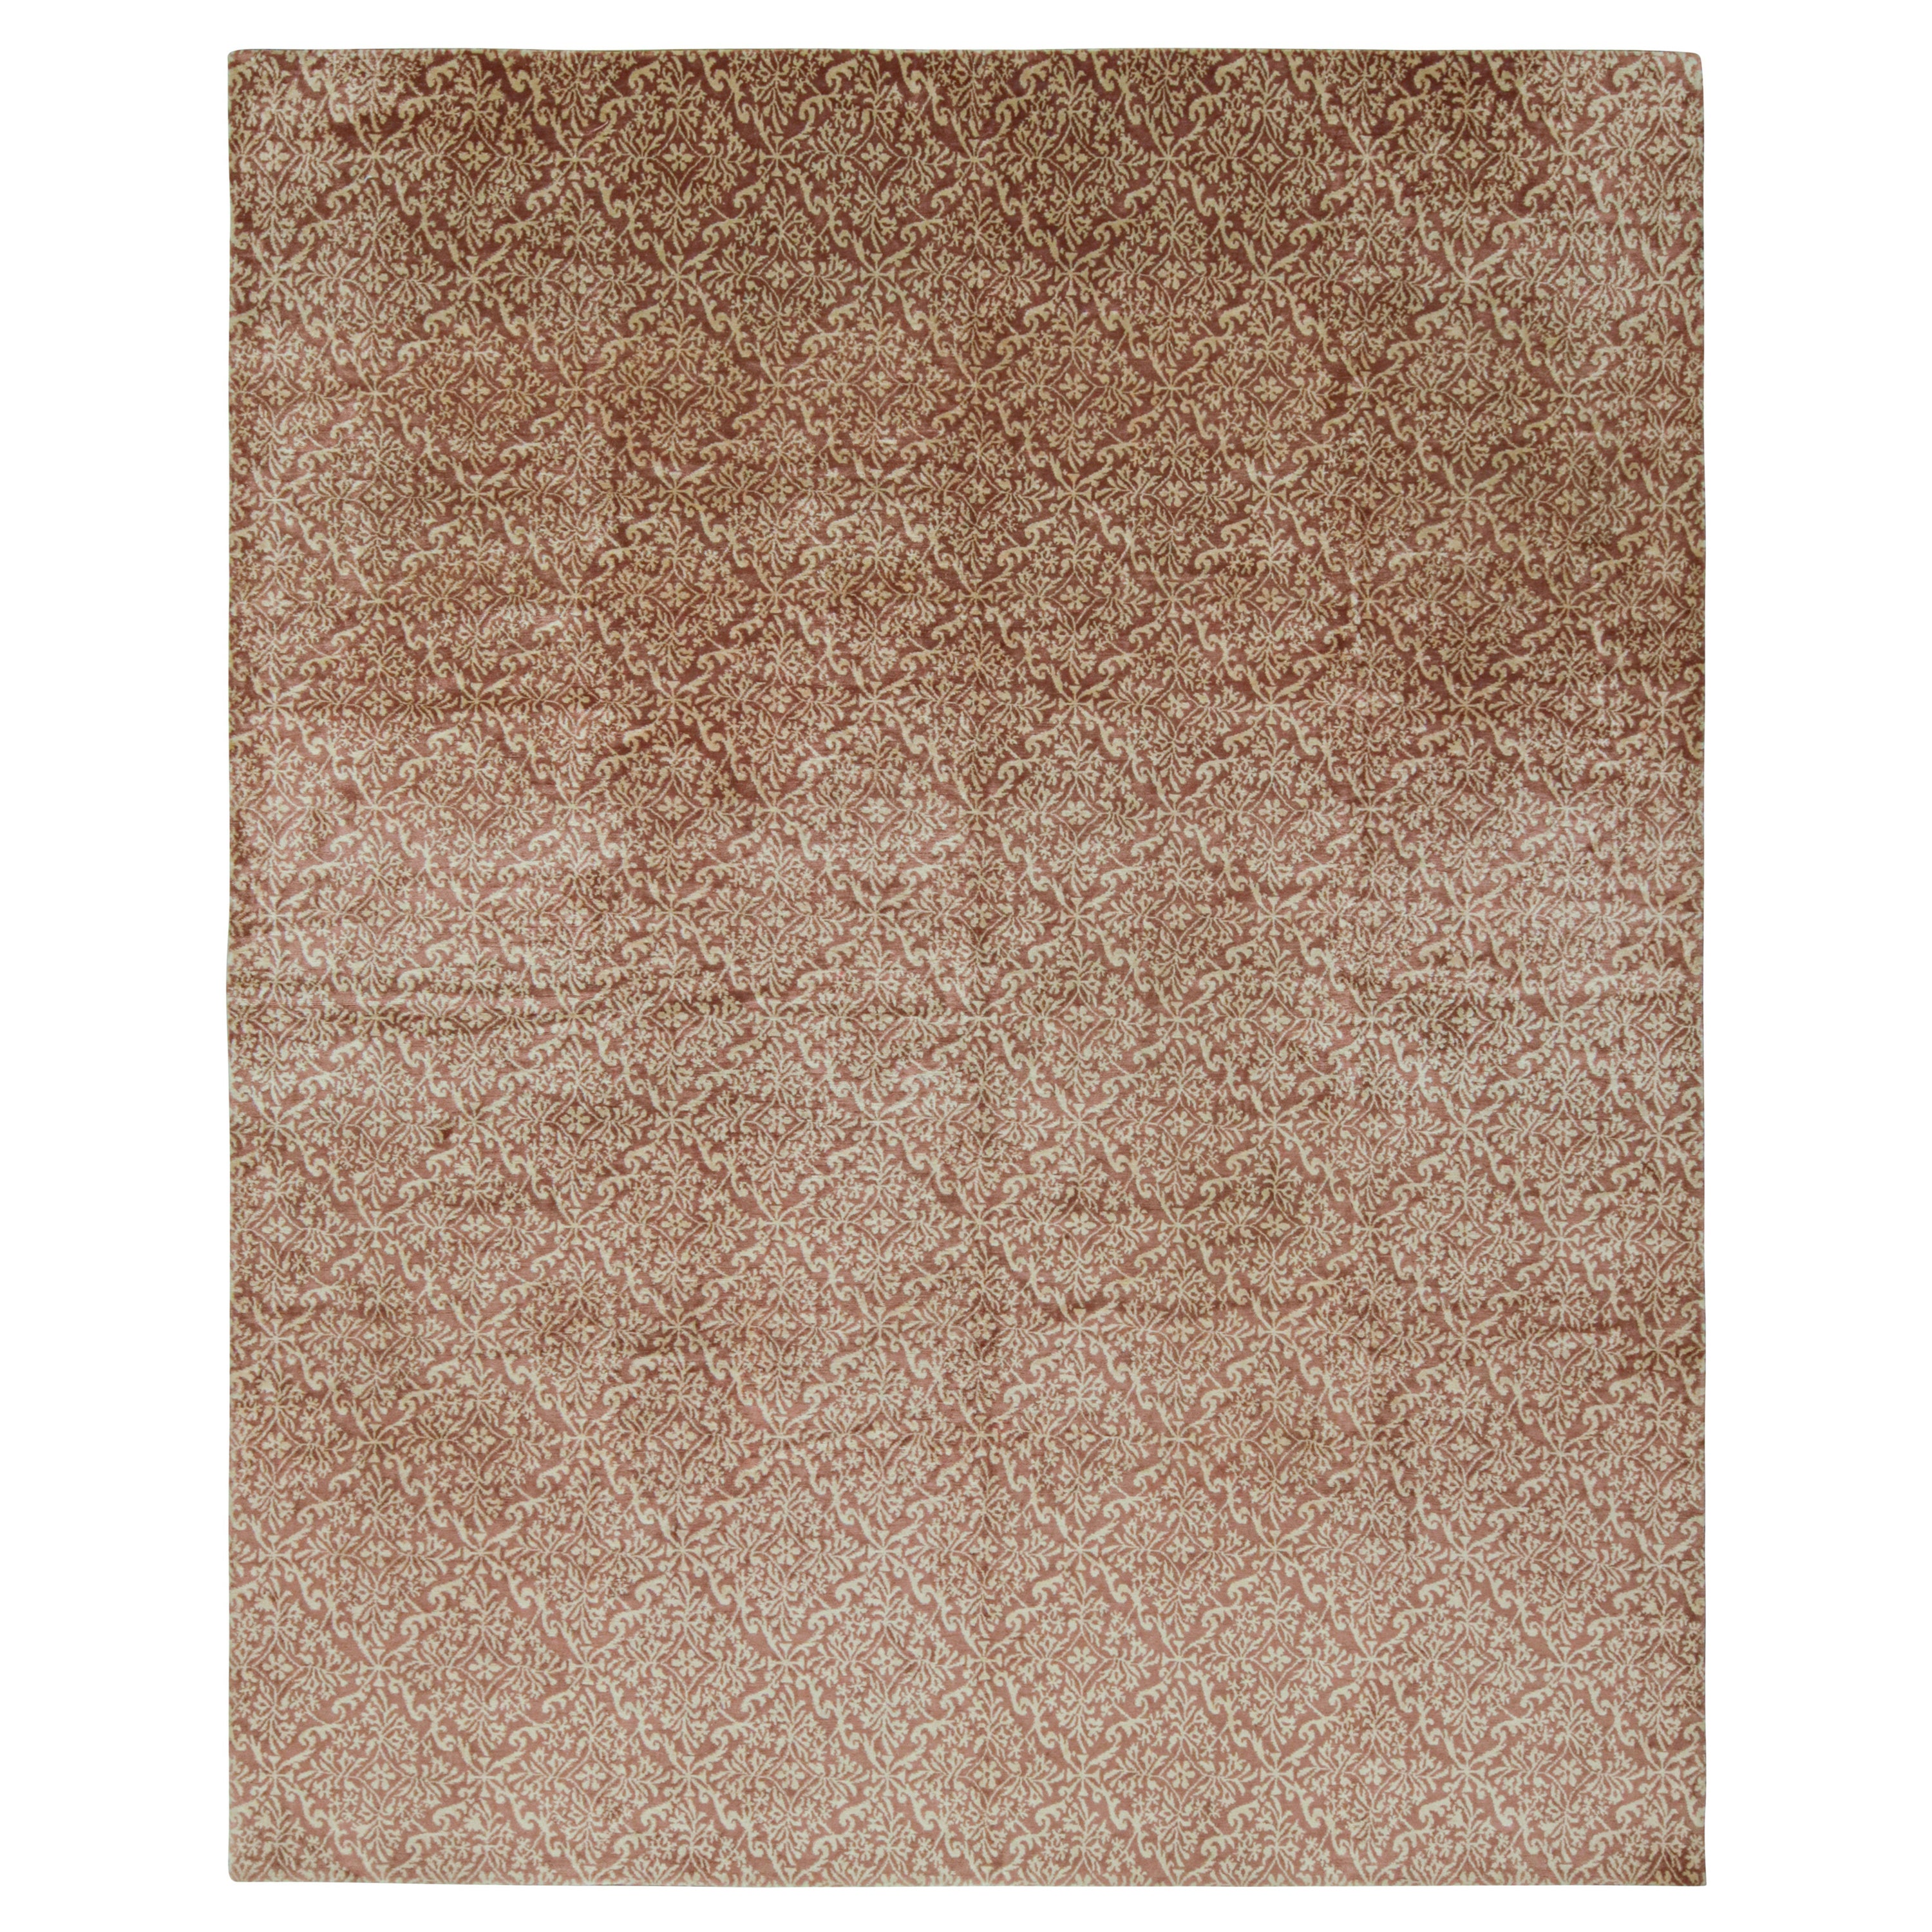 Rug & Kilim’s Spanish European Style Rug in Brown with Floral Pattern “Cordoba” For Sale